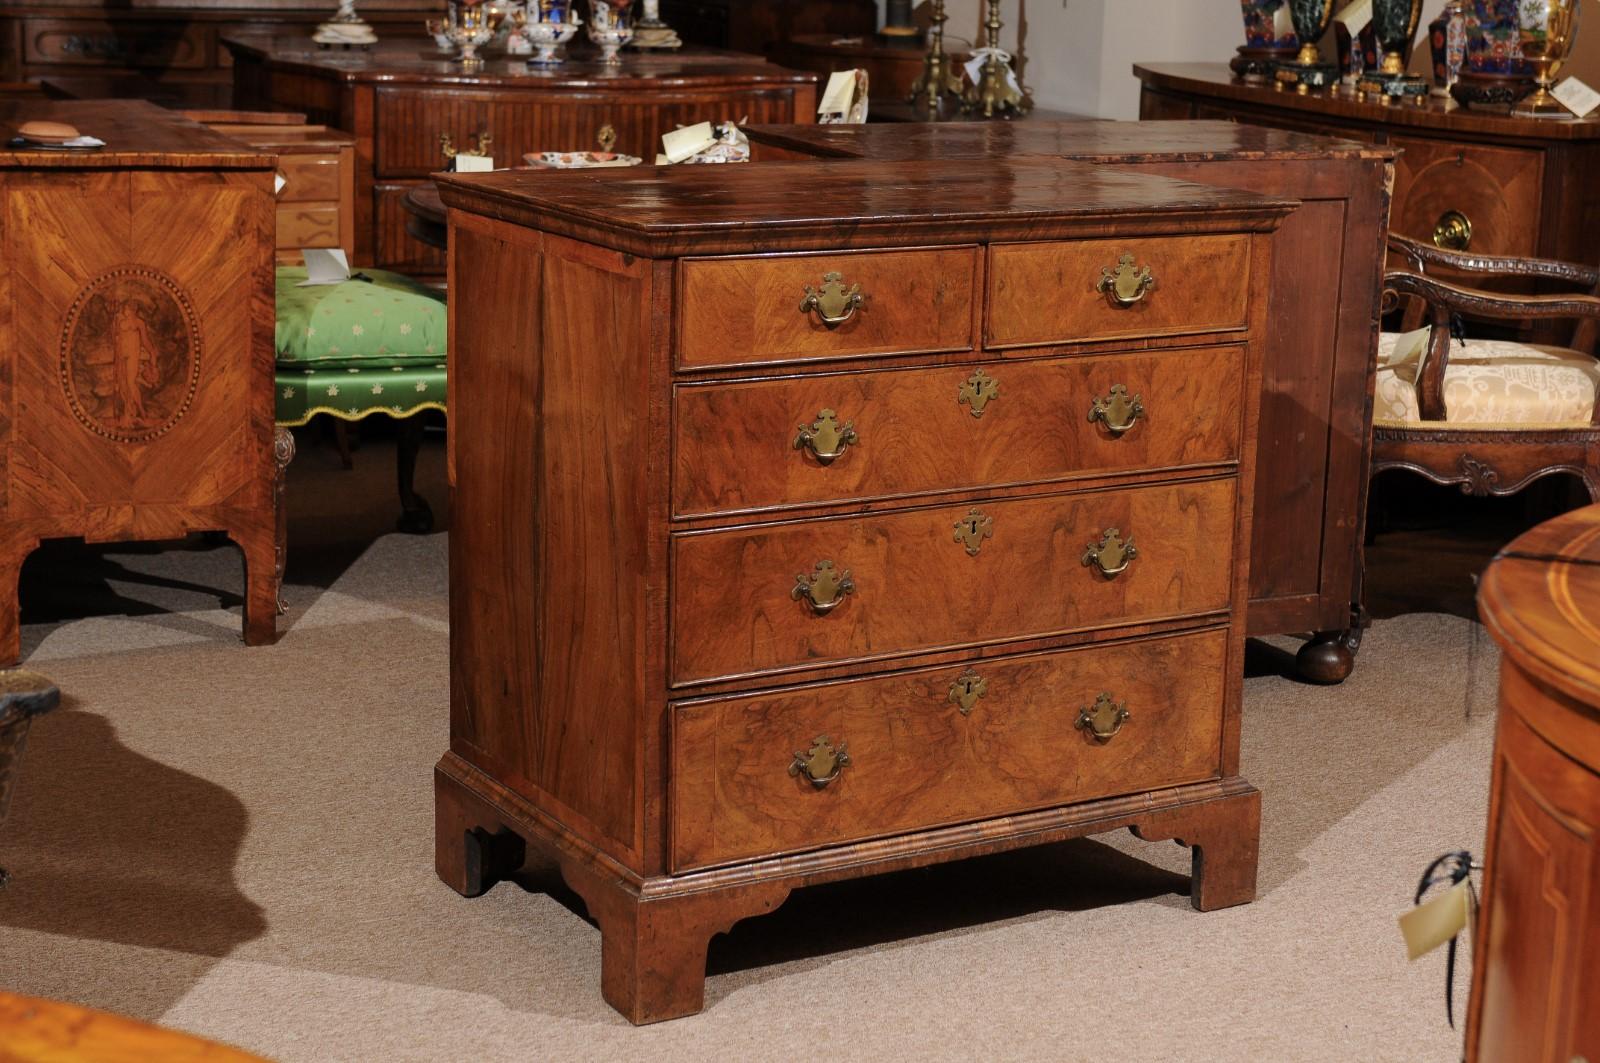 An early 18th century English Queen Anne period chest featuring figured walnut, cross-banding, 5 drawers with brass pulls ending on bracket feet.